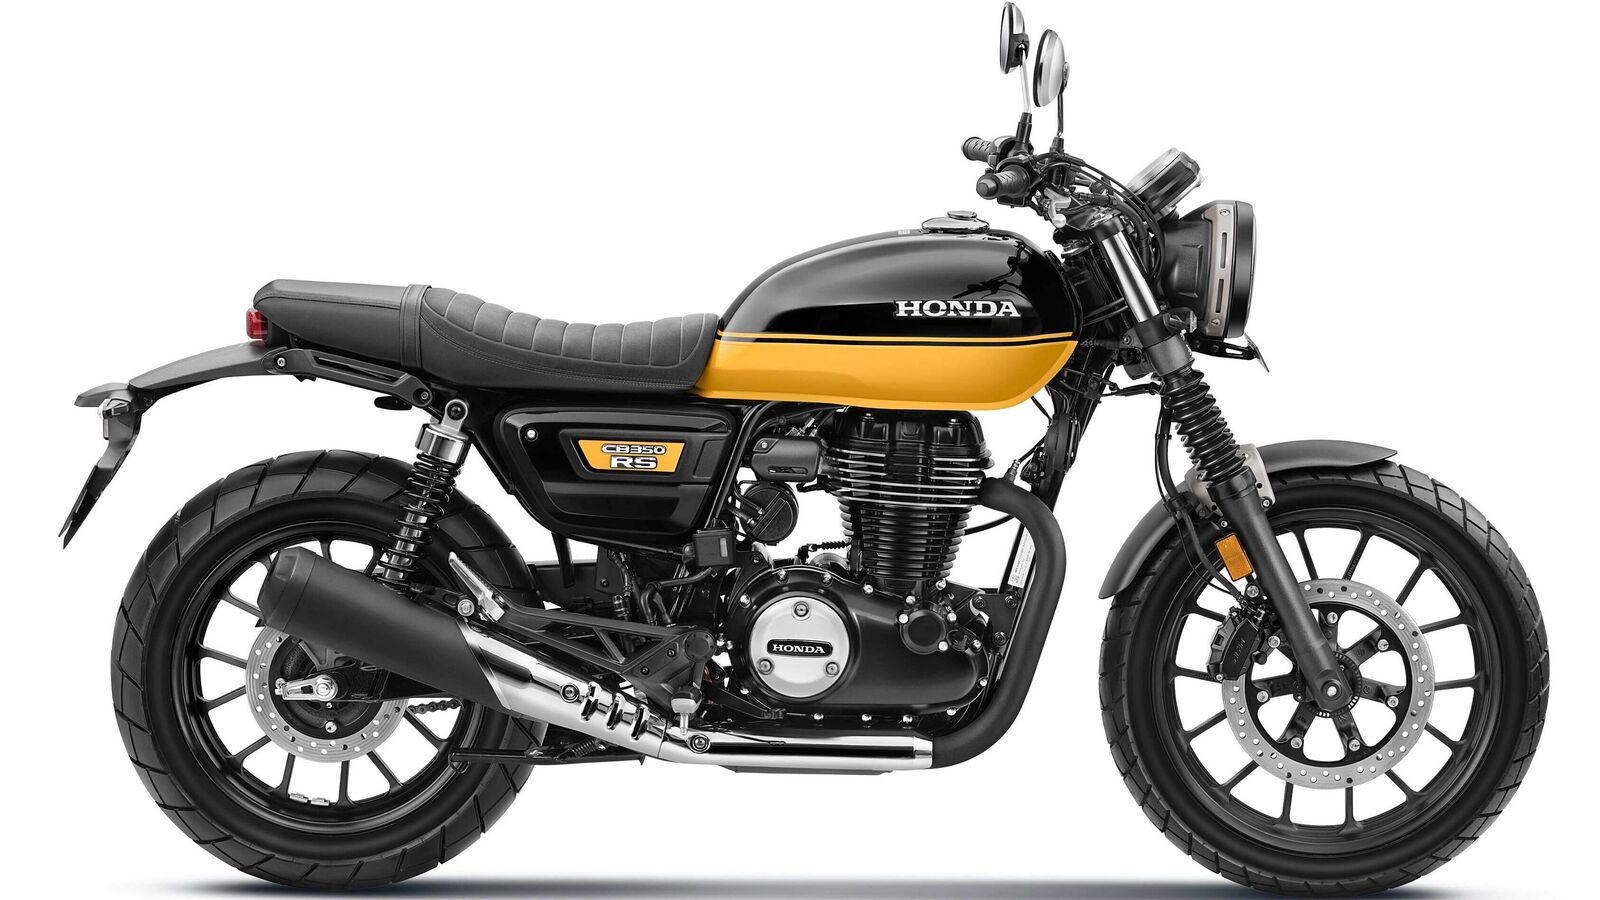 Honda CB350 RS Cafe Racer to be launched on March 2 | HT Auto